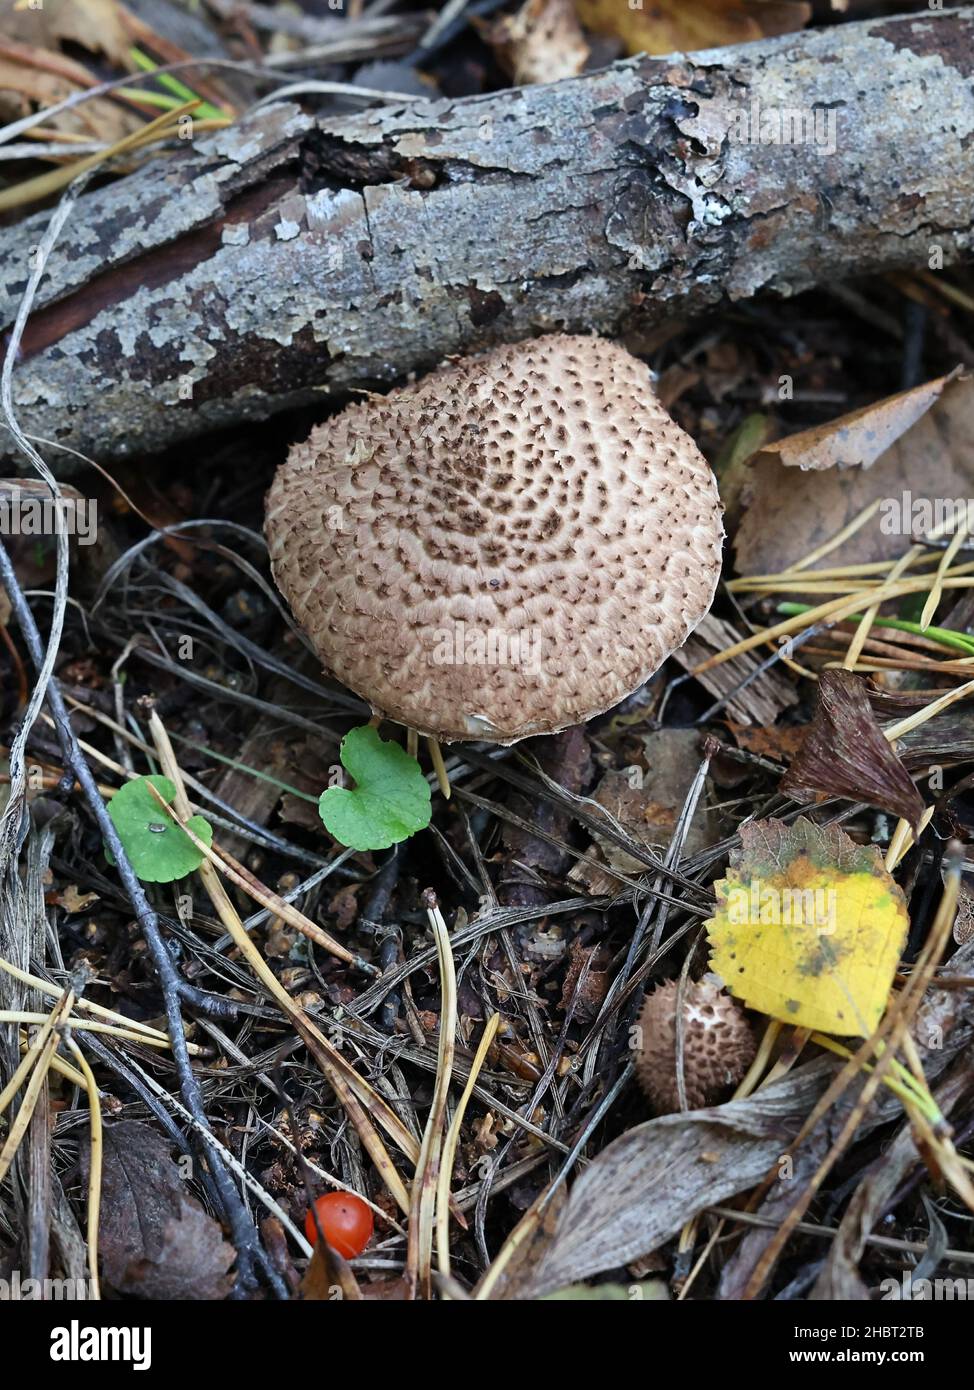 Lepiota echinacea, also called Echinoderma echinaceum, a dapperling mushroom from Finland with no common English name Stock Photo